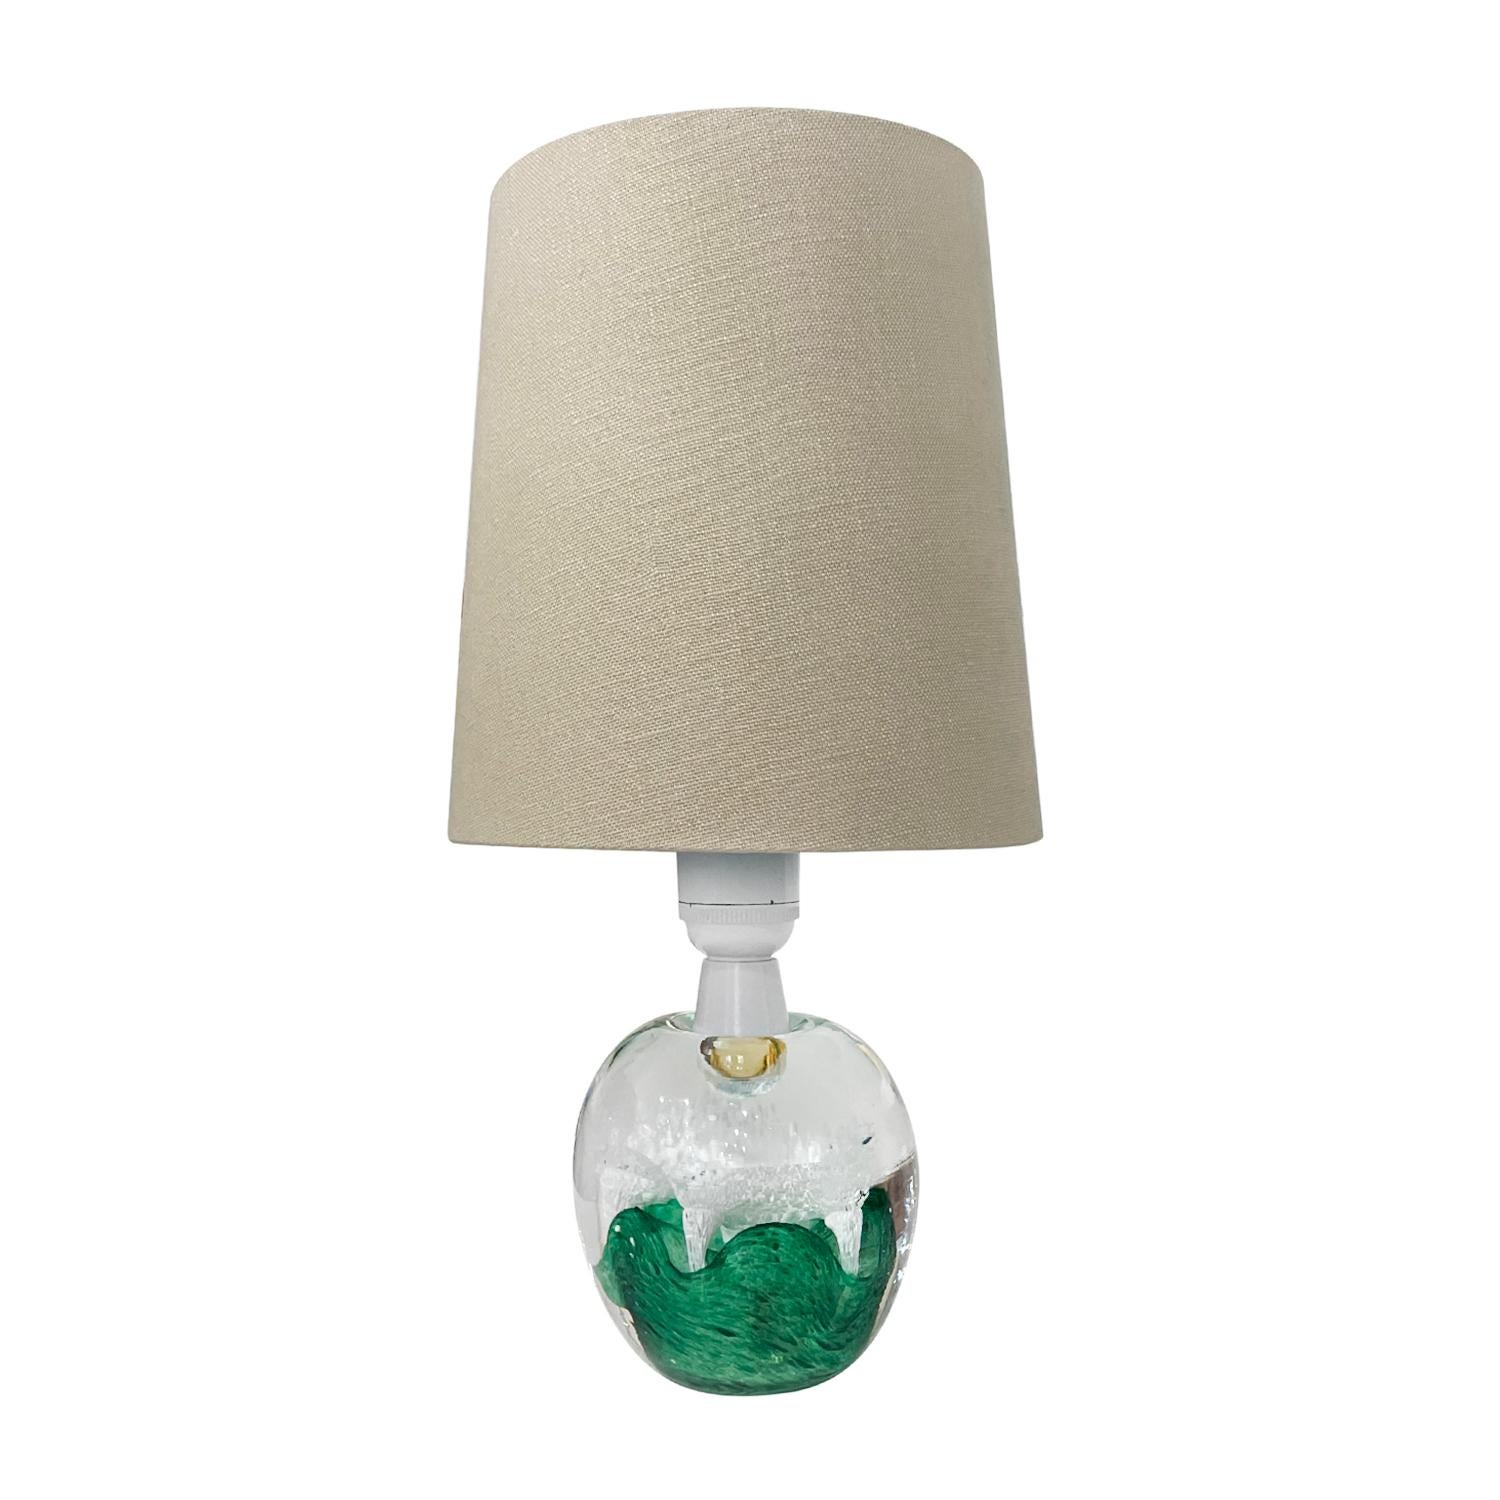 A small, late vintage Mid-Century modern Swedish table lamp with a new beige shade, made of colored Orrefors glass designed by Ölandshyttan in good condition. The inside of the Scandinavian slightly smoked apple shaped desk light is particularized